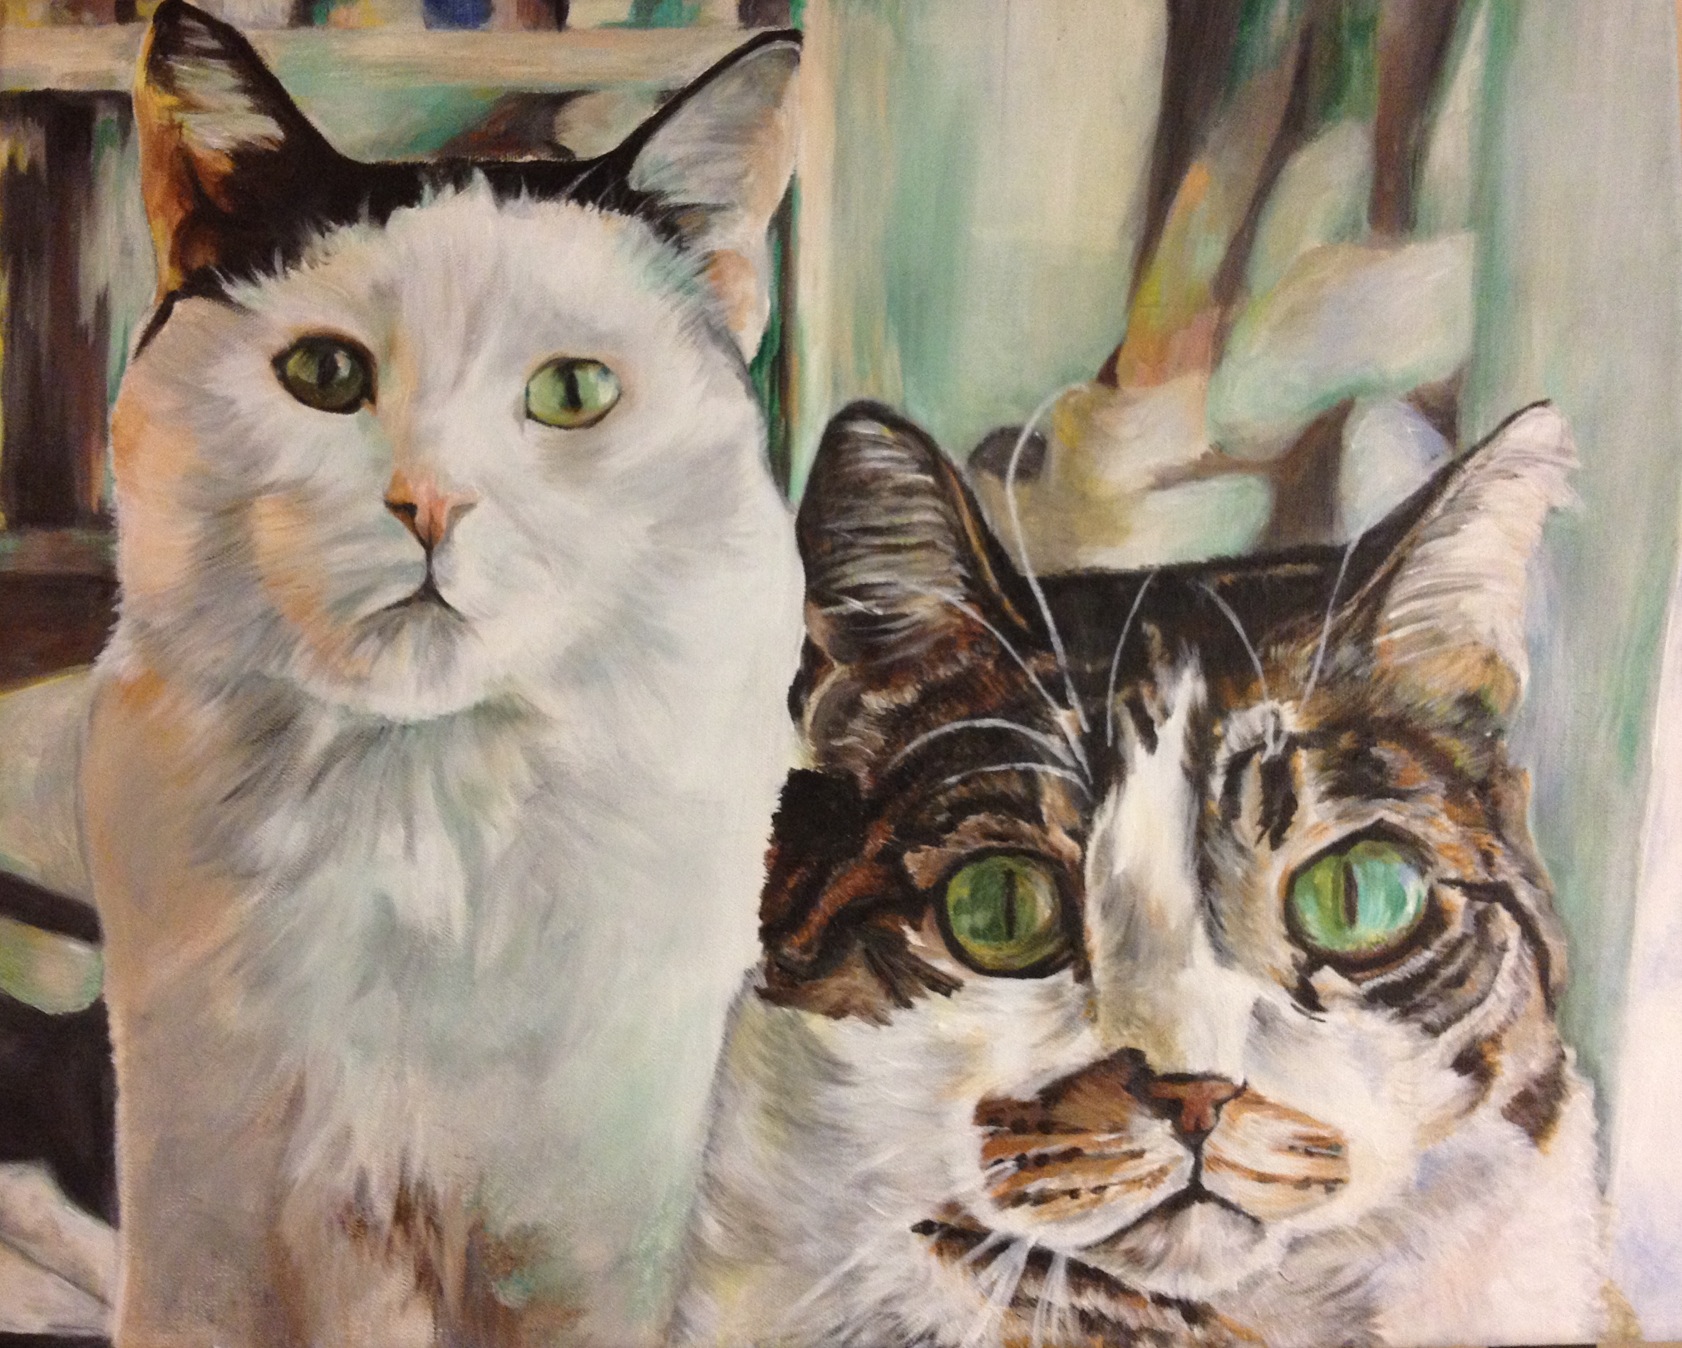 "For the Love of Cats" by Amanda Clark, a former Macon Arts Alliance intern